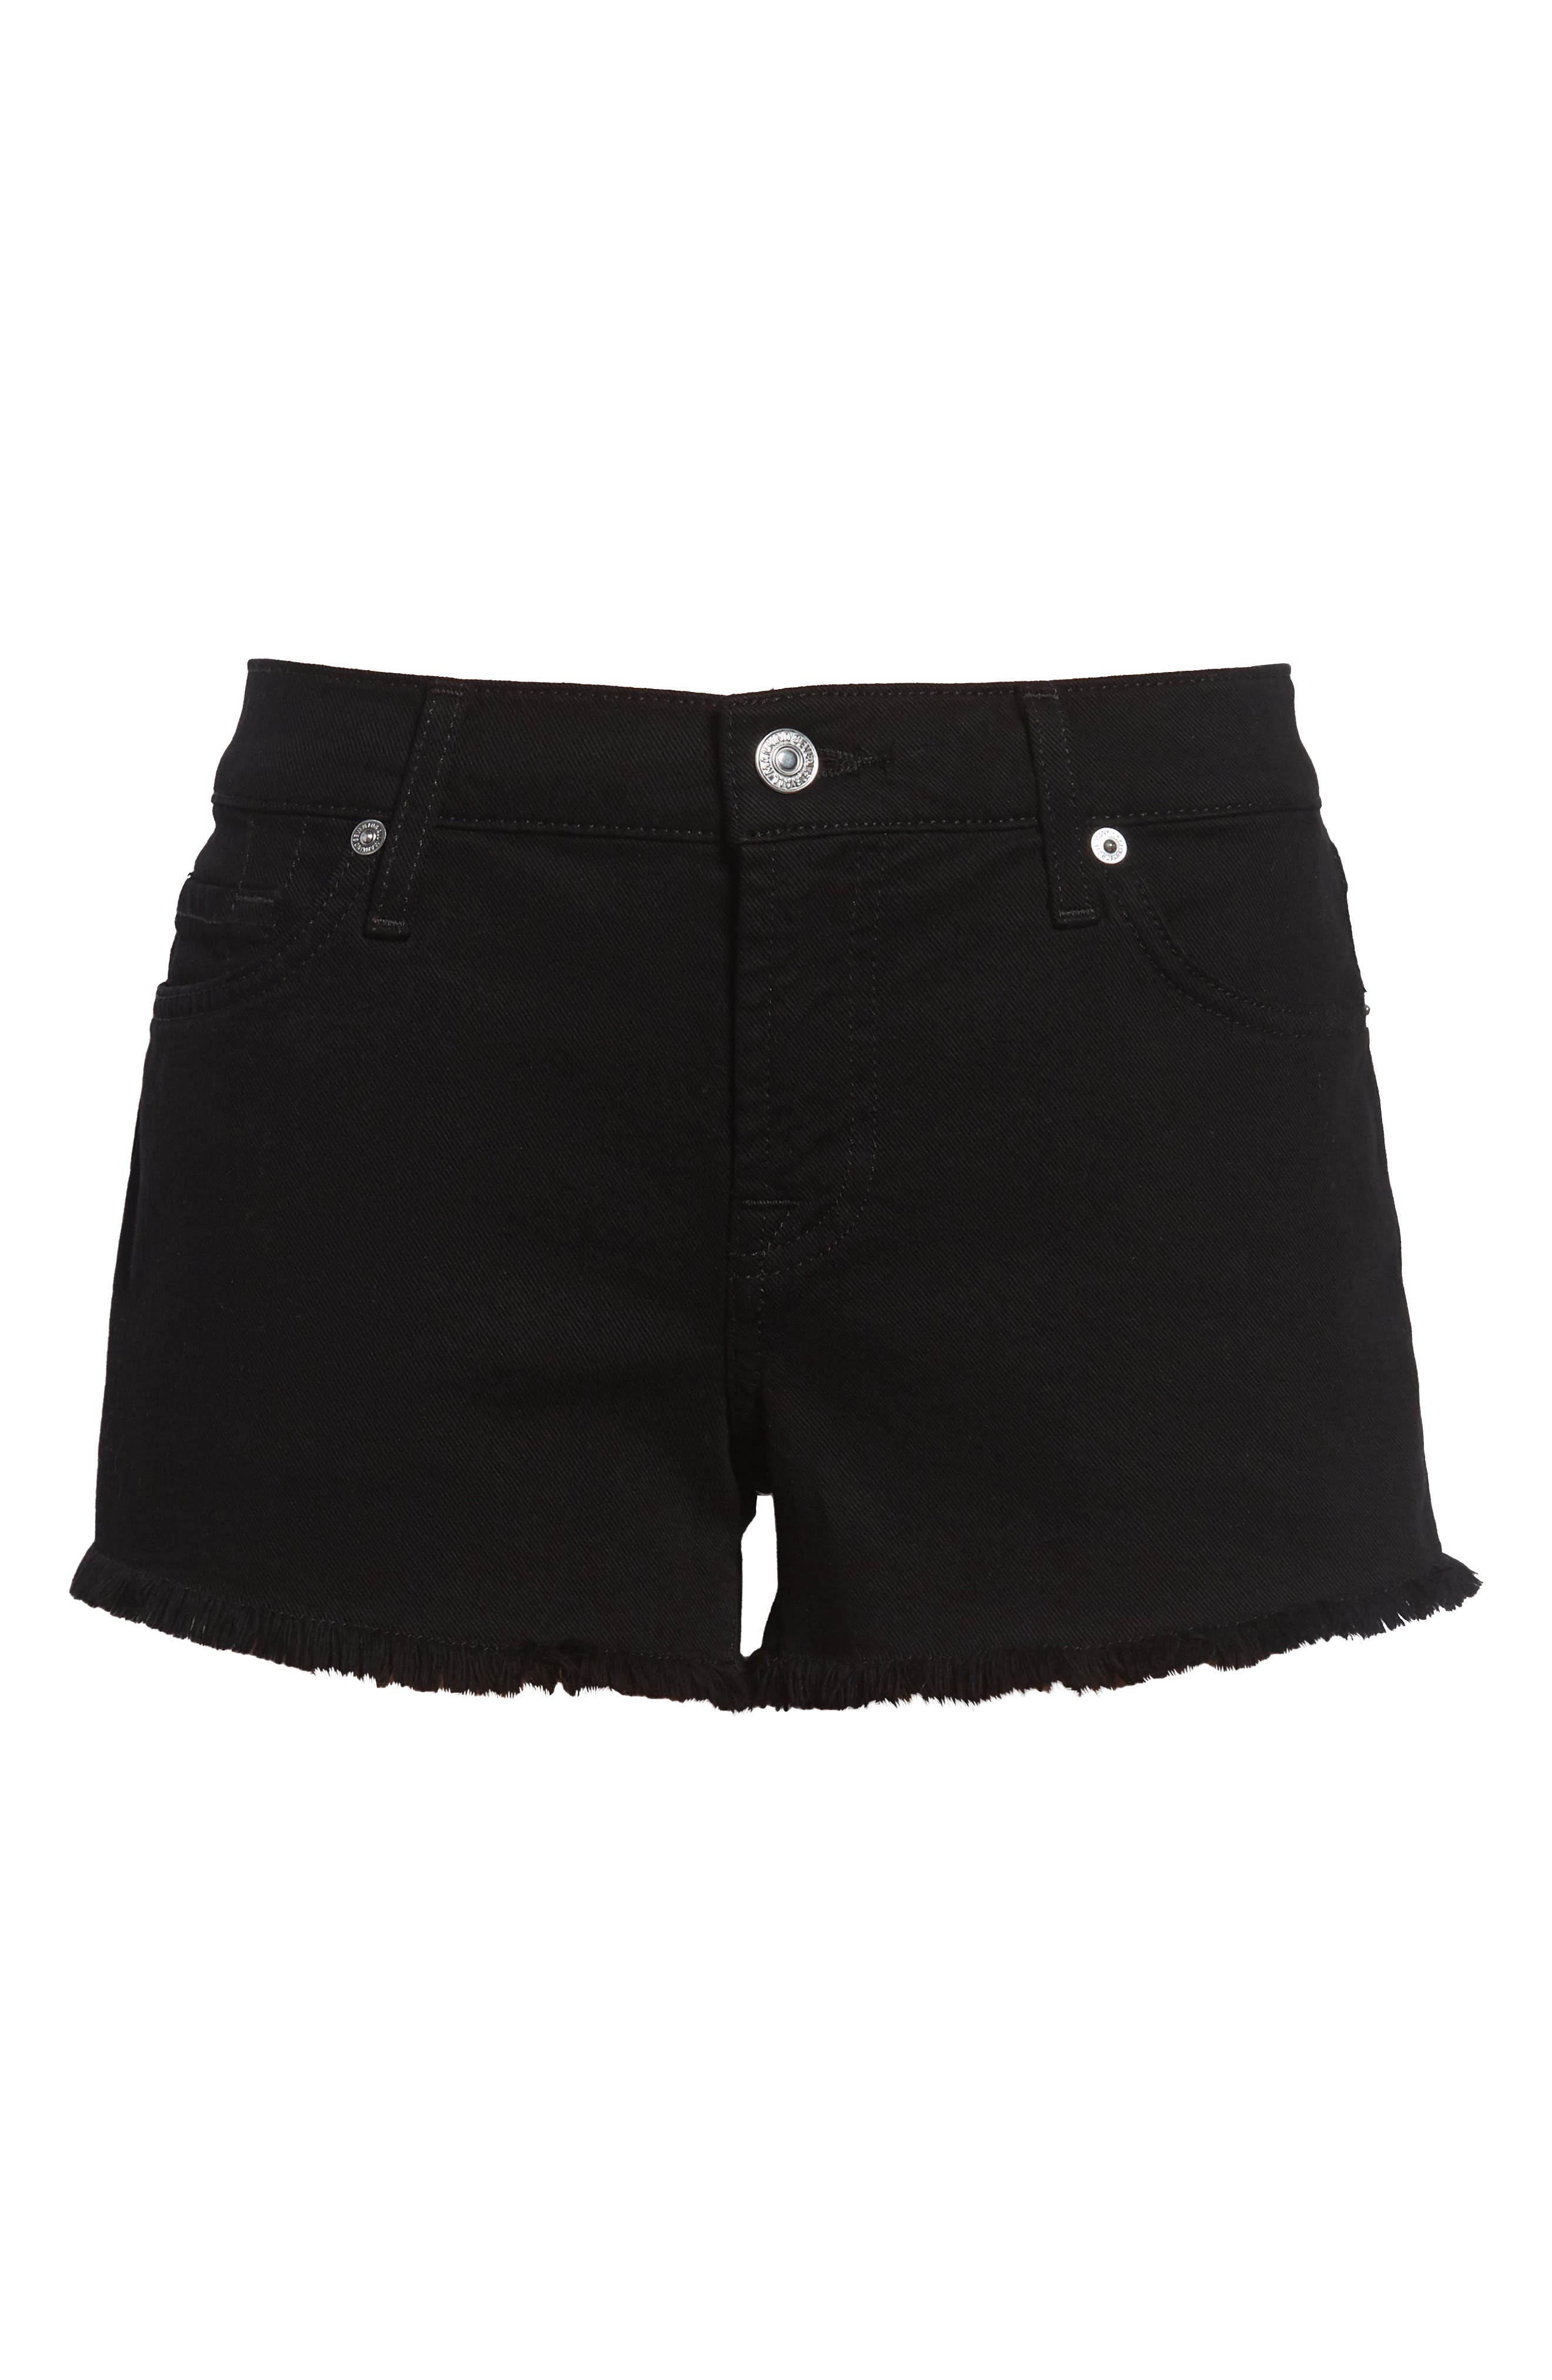 Women's 7 For All Mankind Shorts